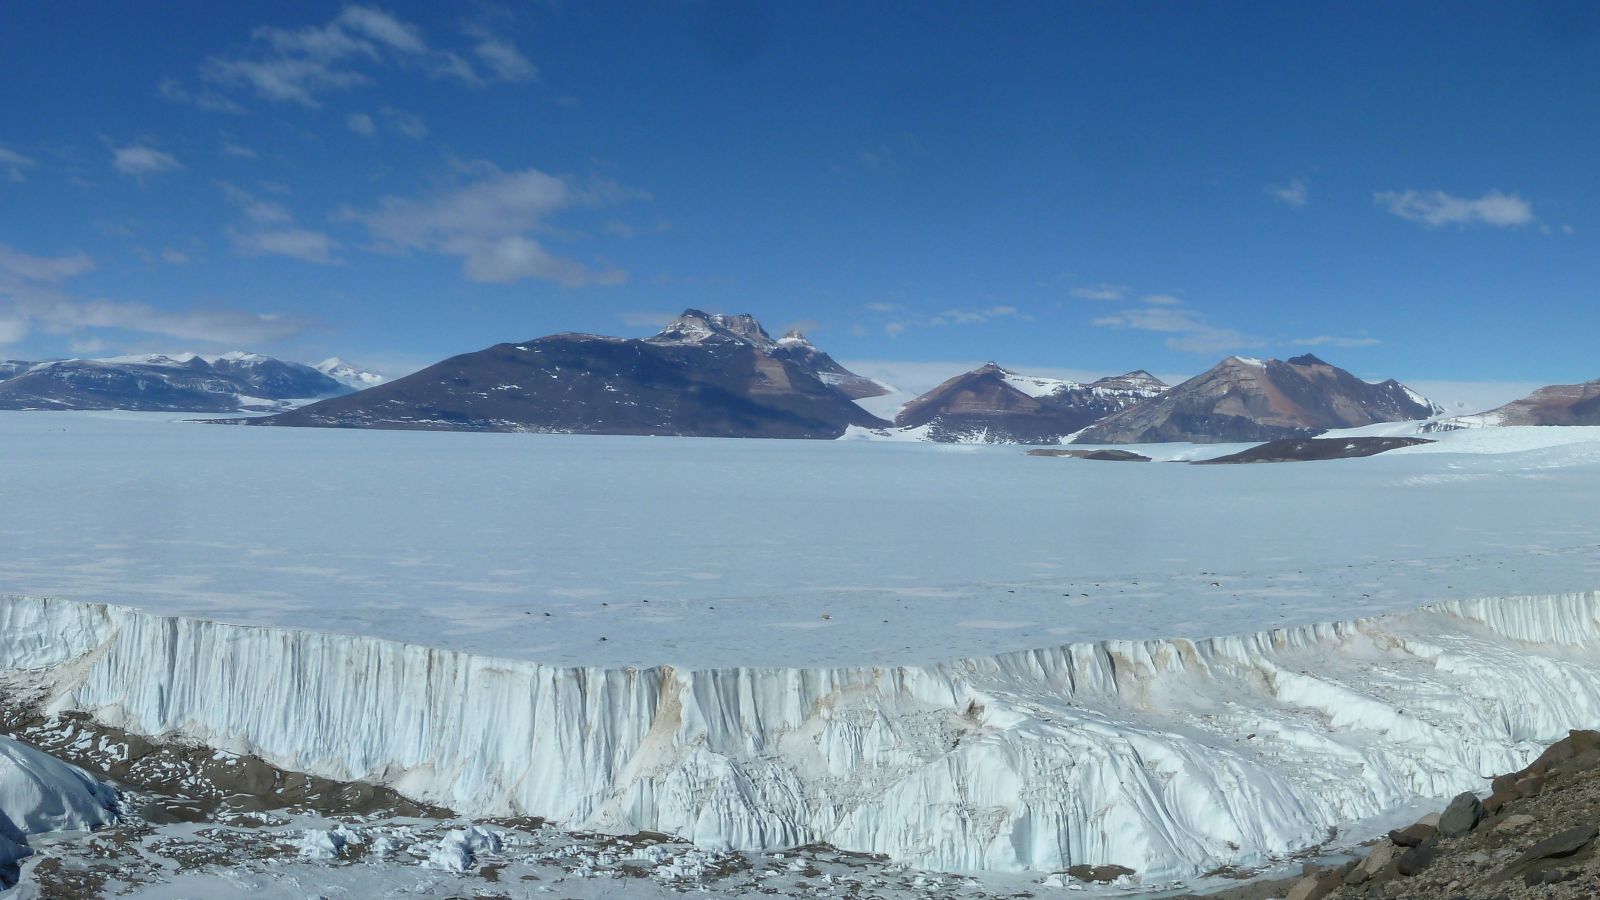 Taylor Glacier, Antarctica with mountains in the background.